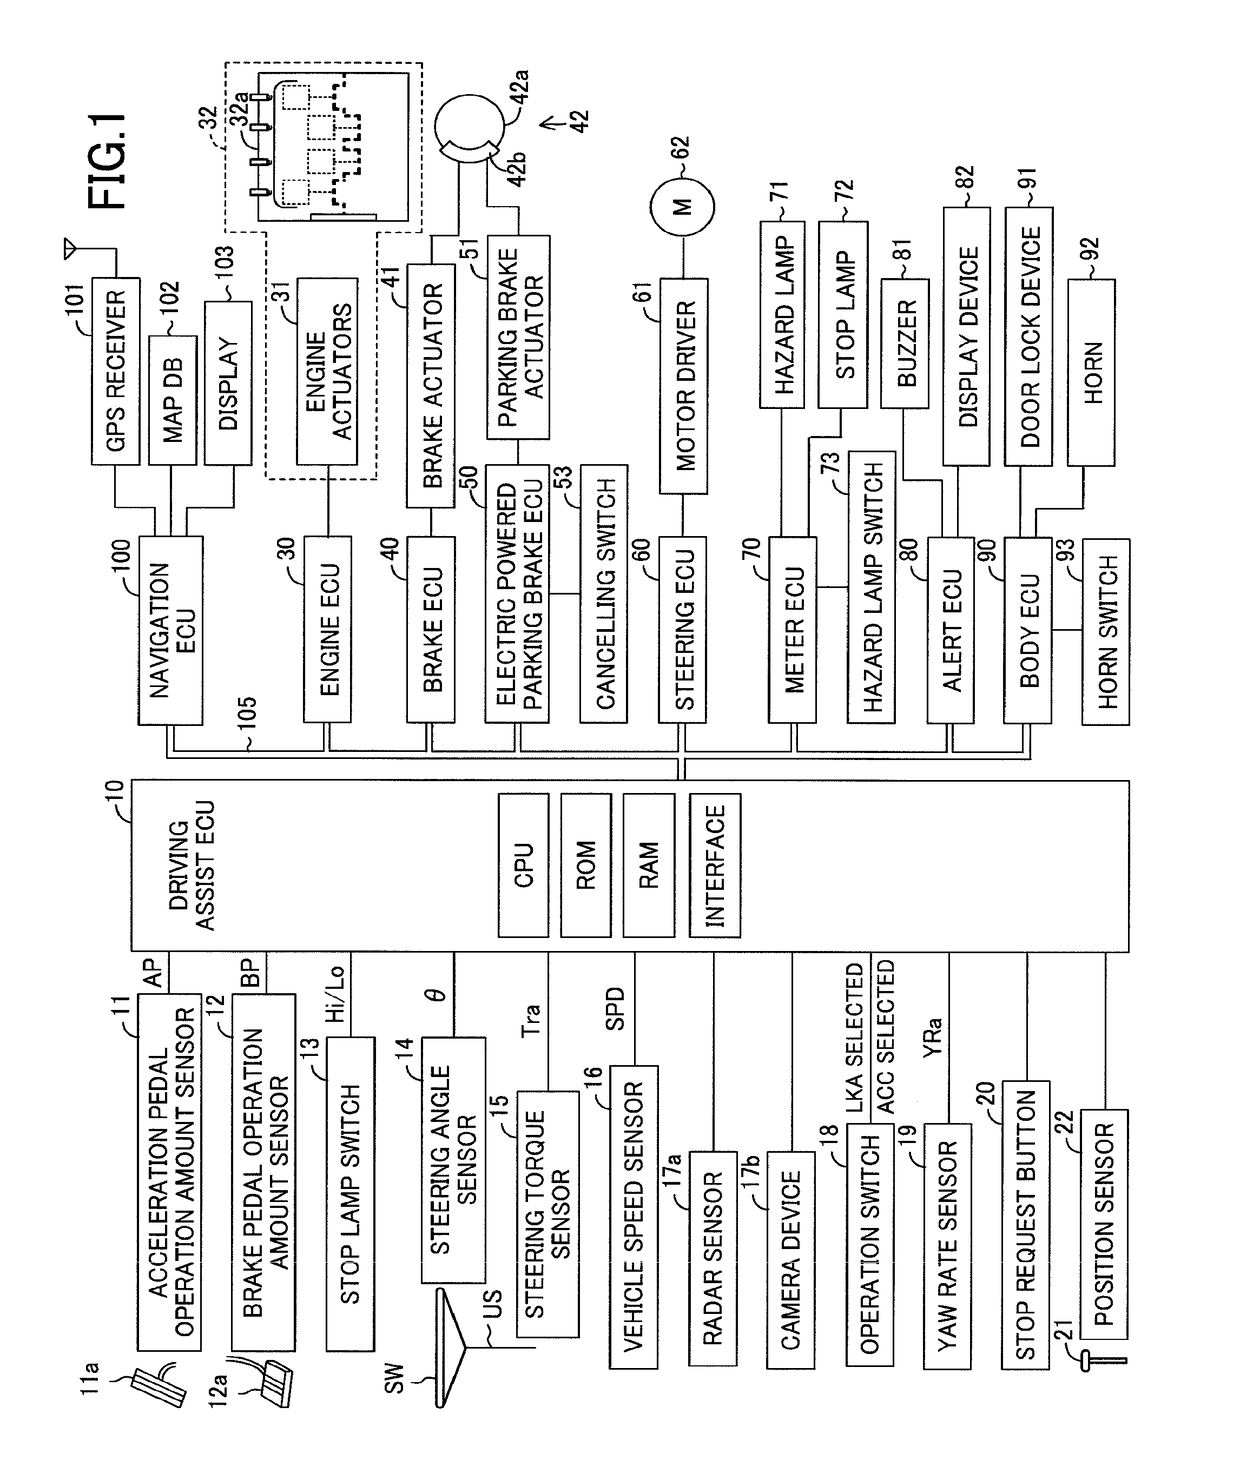 Vehicle traveling control apparatus